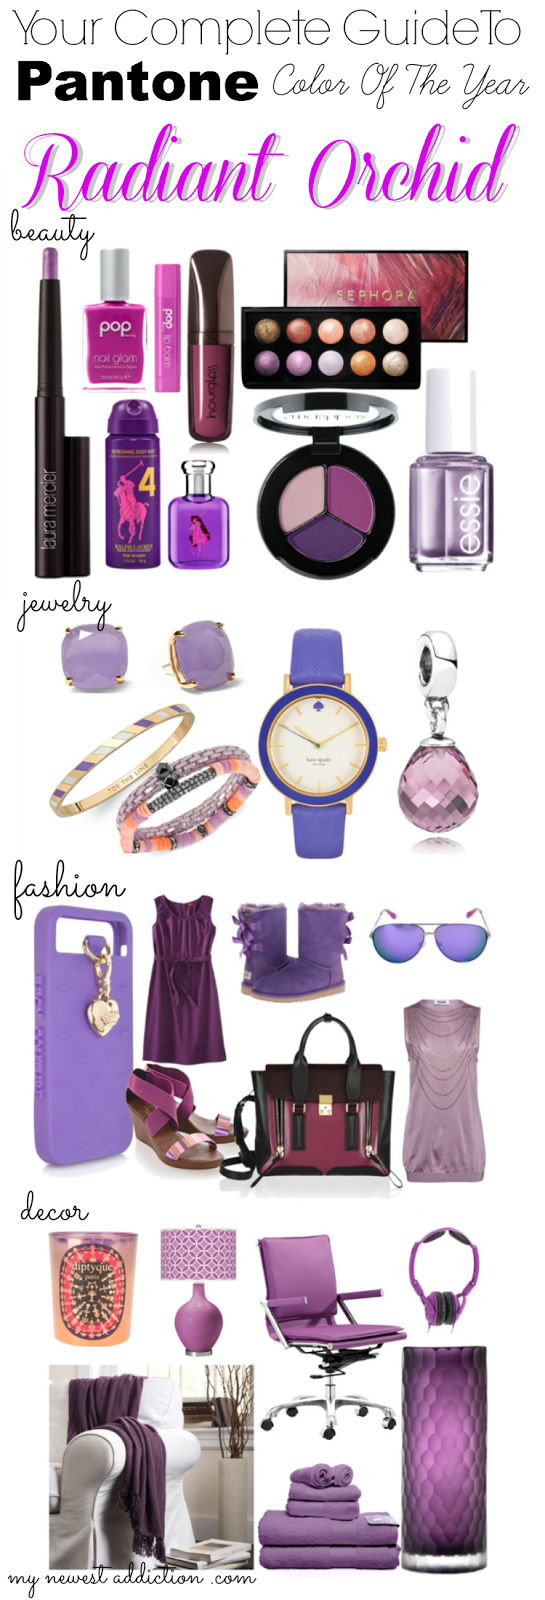 radiant orchid pantone color of the year beauty fashion jewelry home decor purple 